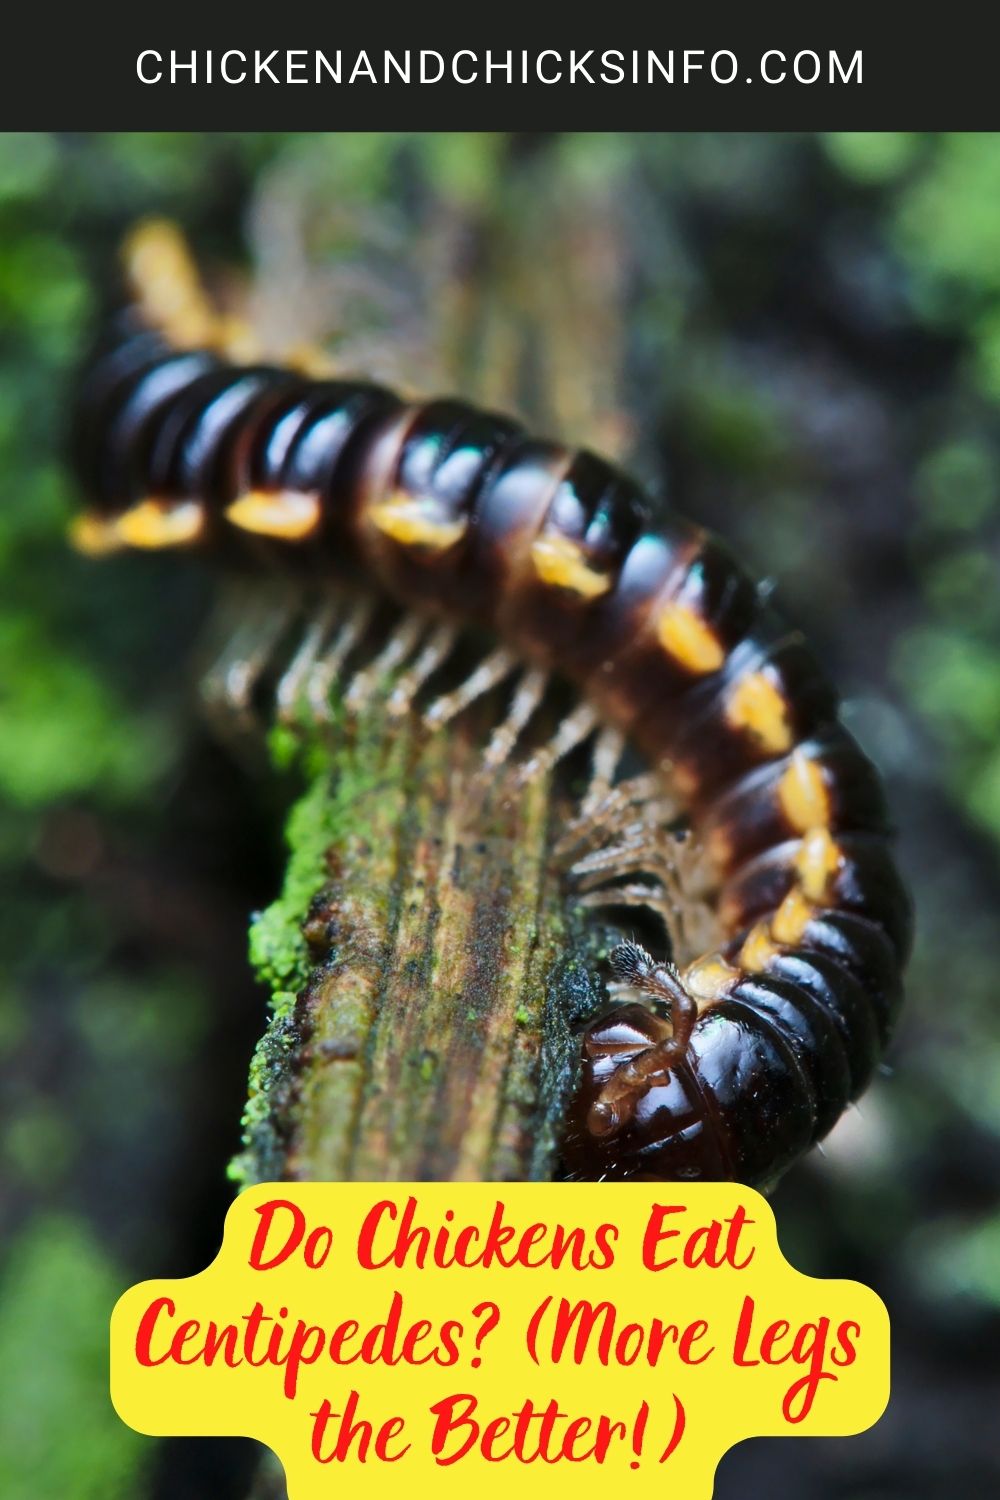 Do Chickens Eat Centipedes? (More Legs the Better!) poster.
